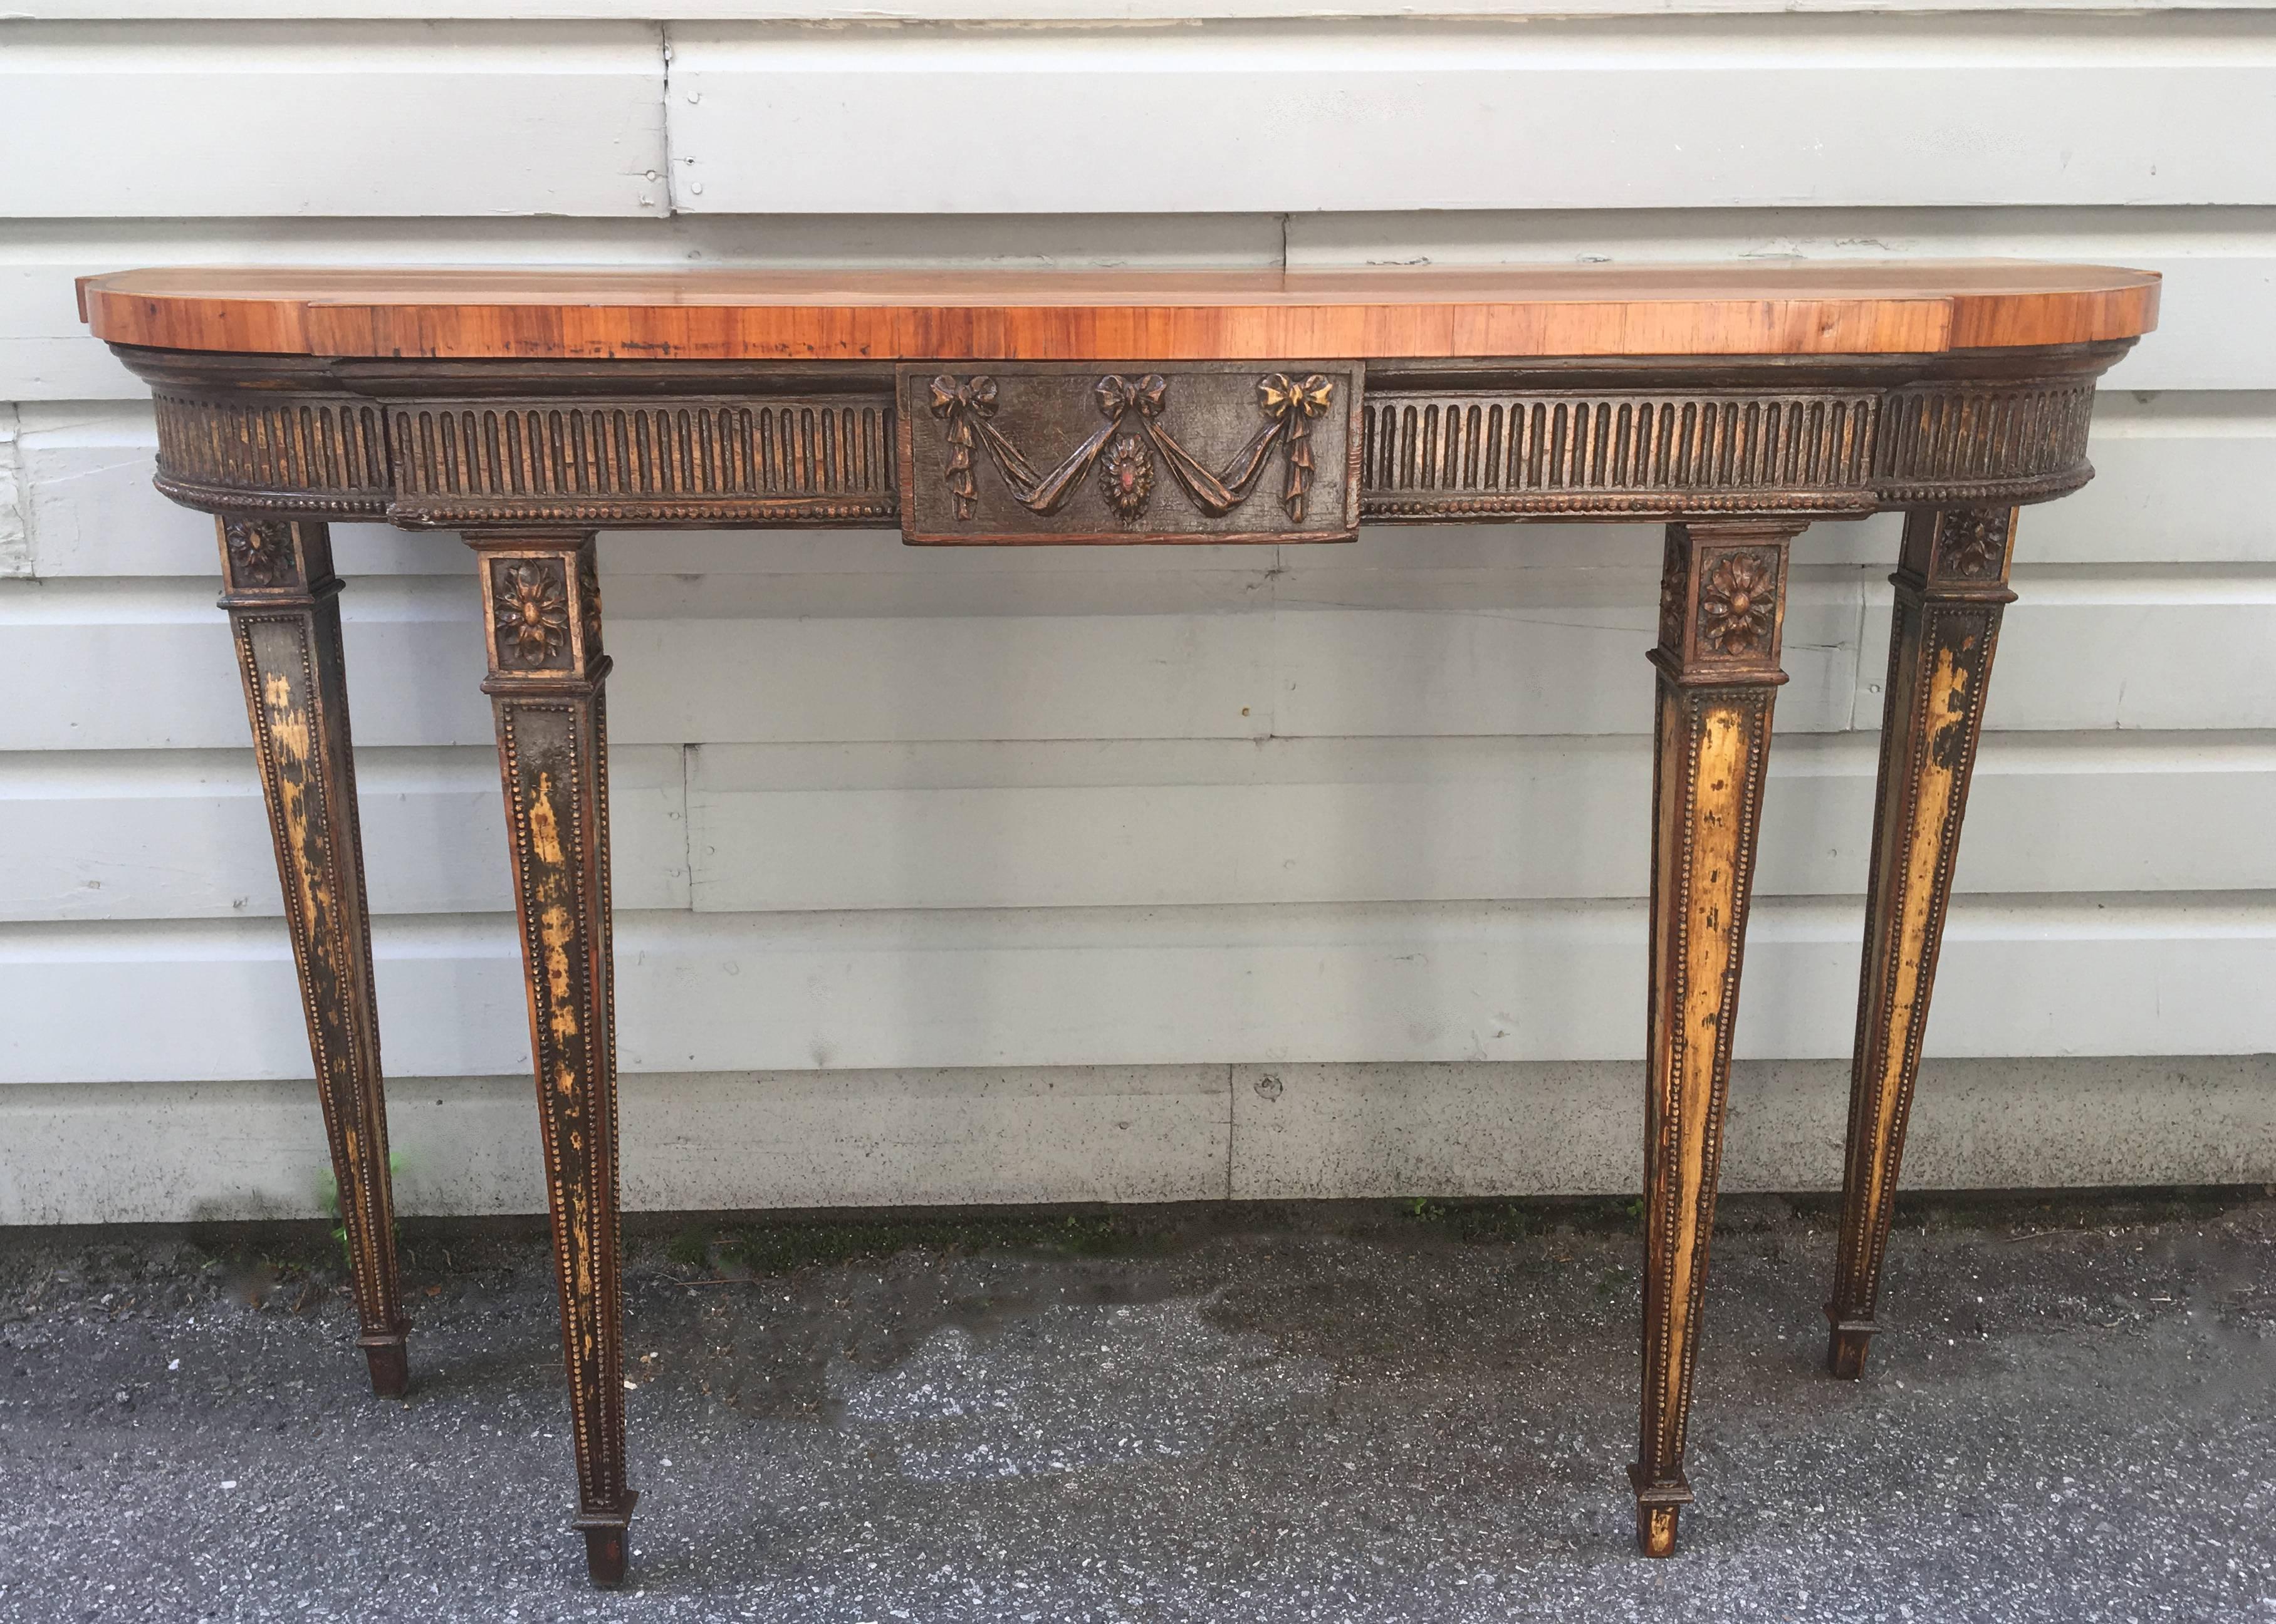 18th century Adams console table with distressed base and satinwood top. All carved wood with some original paint still showing.